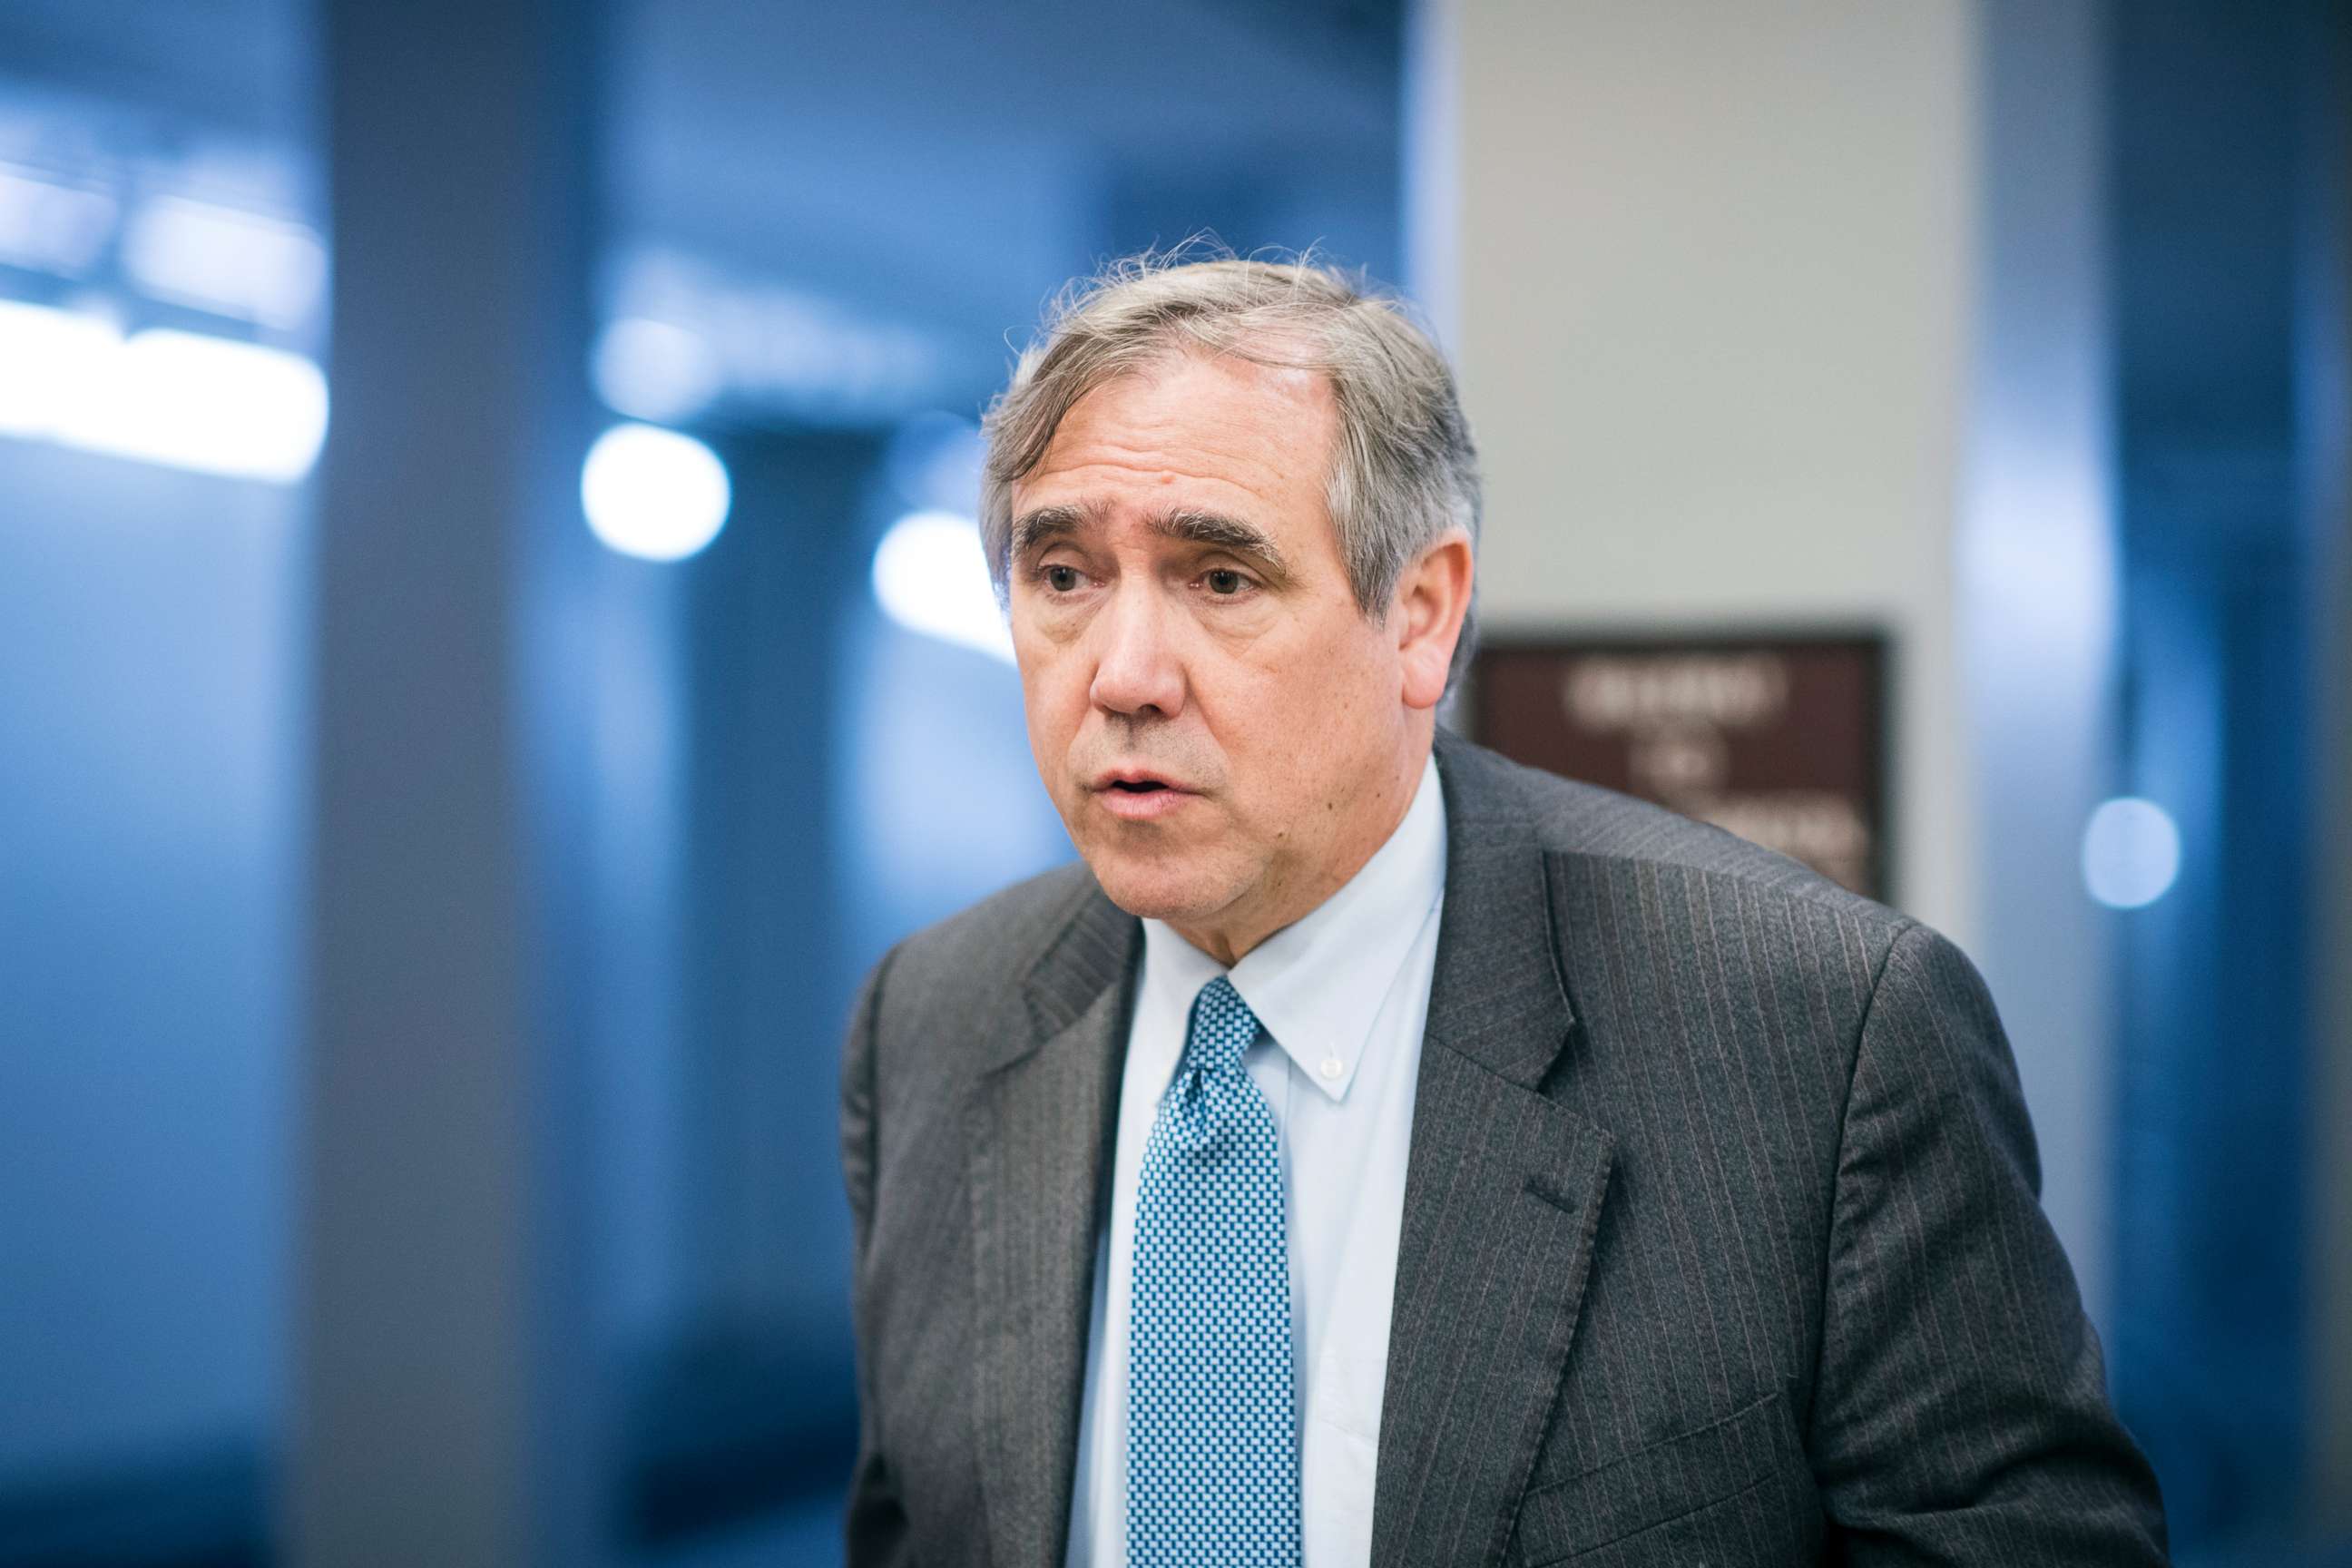 PHOTO: Sen. Jeff Merkley arrives in the Capitol for the Senate Democrats' policy lunch, May 15, 2018, in Washington, DC.